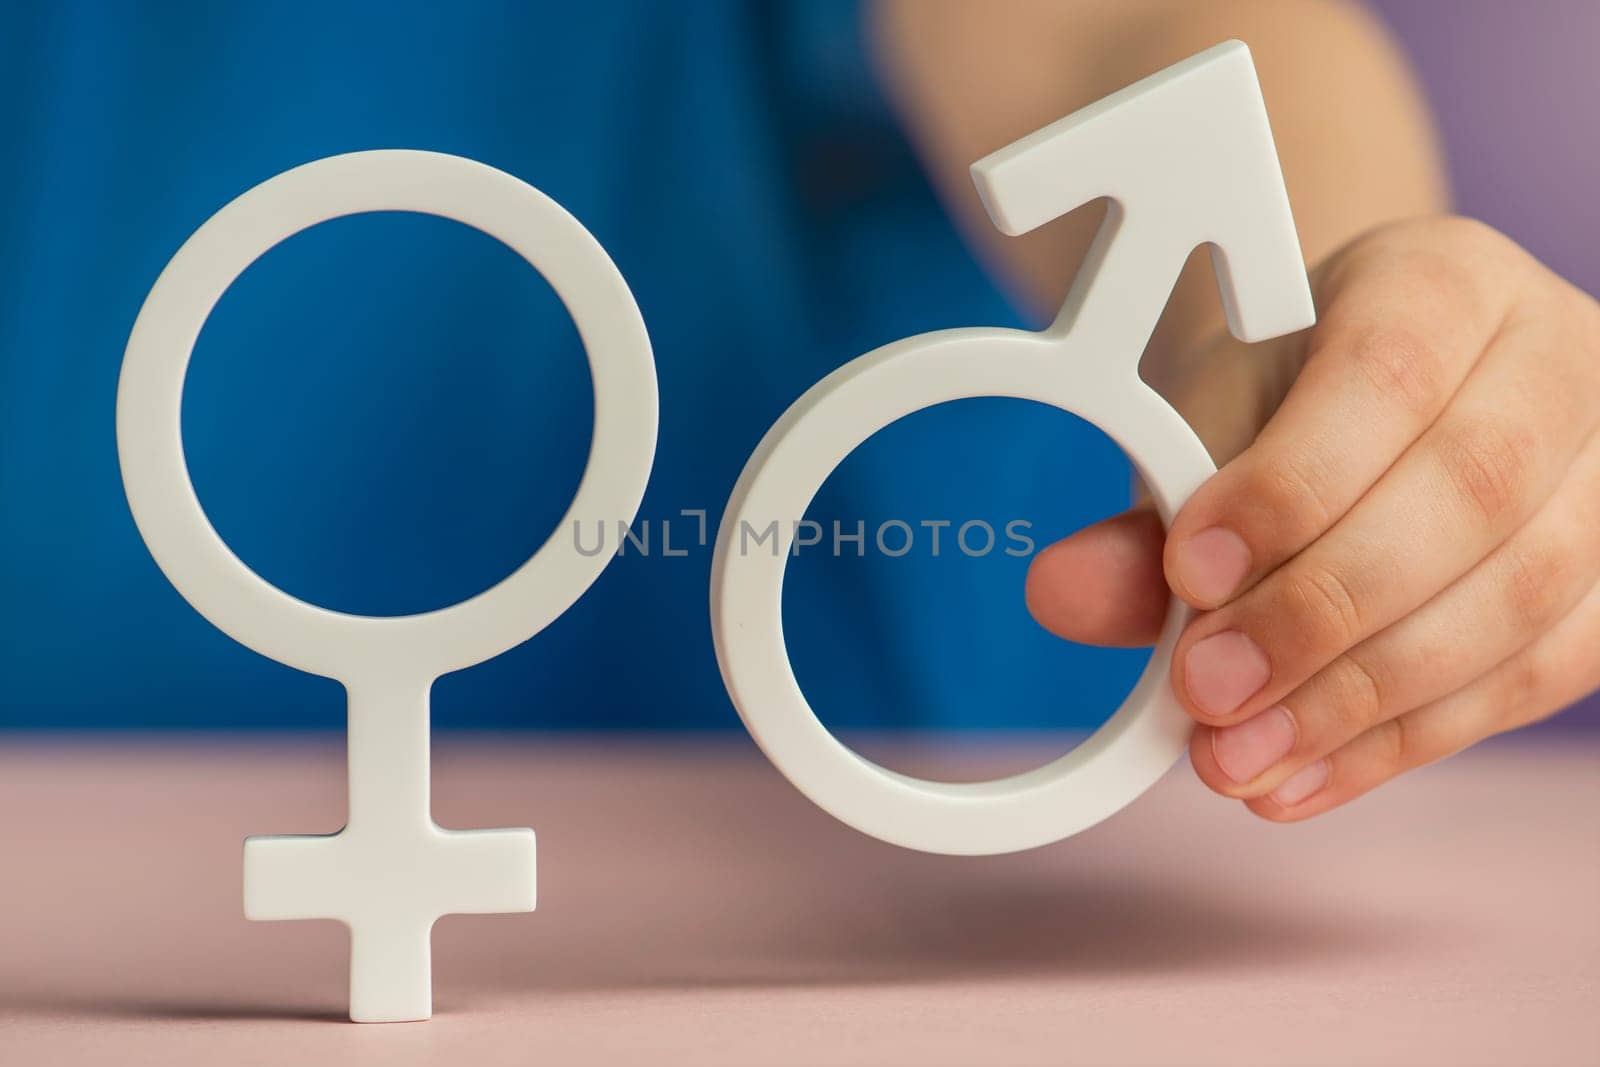 The concept of gender equality. Symbol of female and male gender in hand as a symbol of equality of rights. On a purple background in a blue t-shirt with copy space by SERSOL